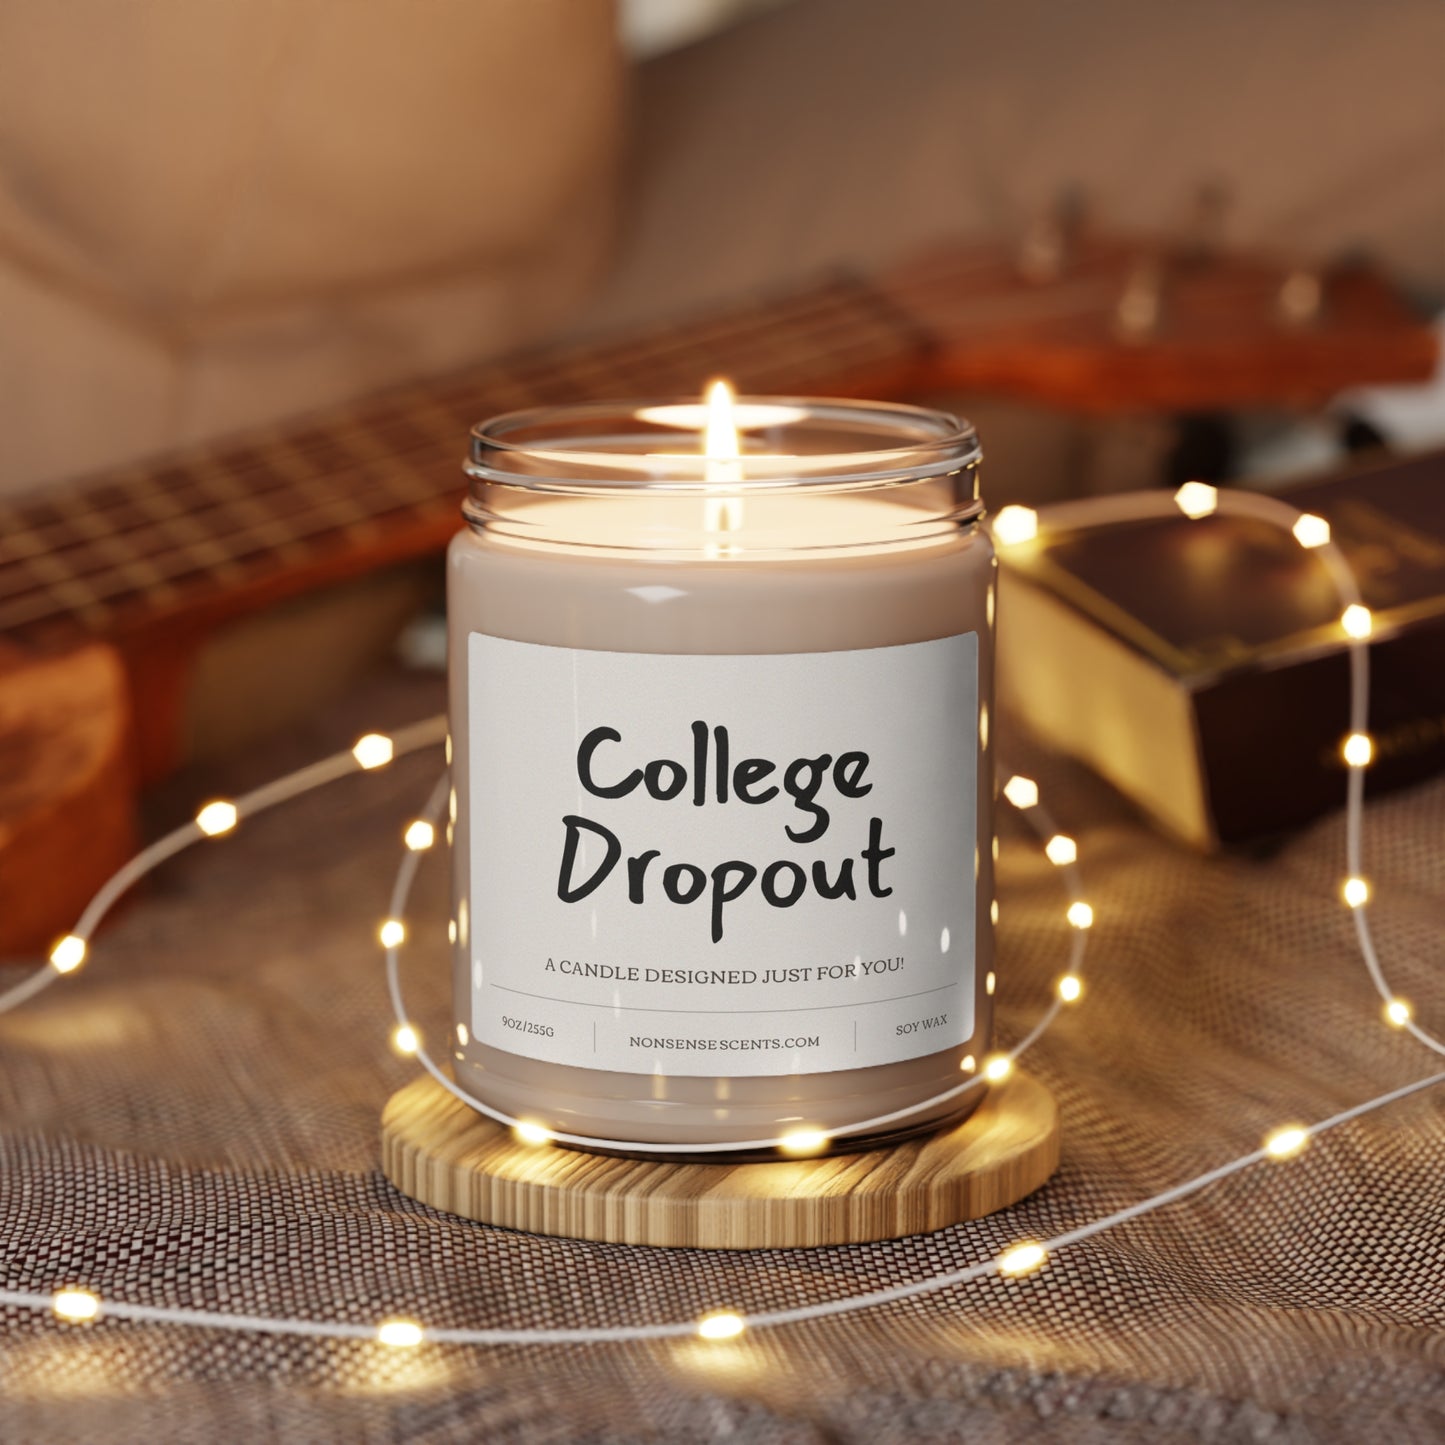 "College Dropout" Scented Candle